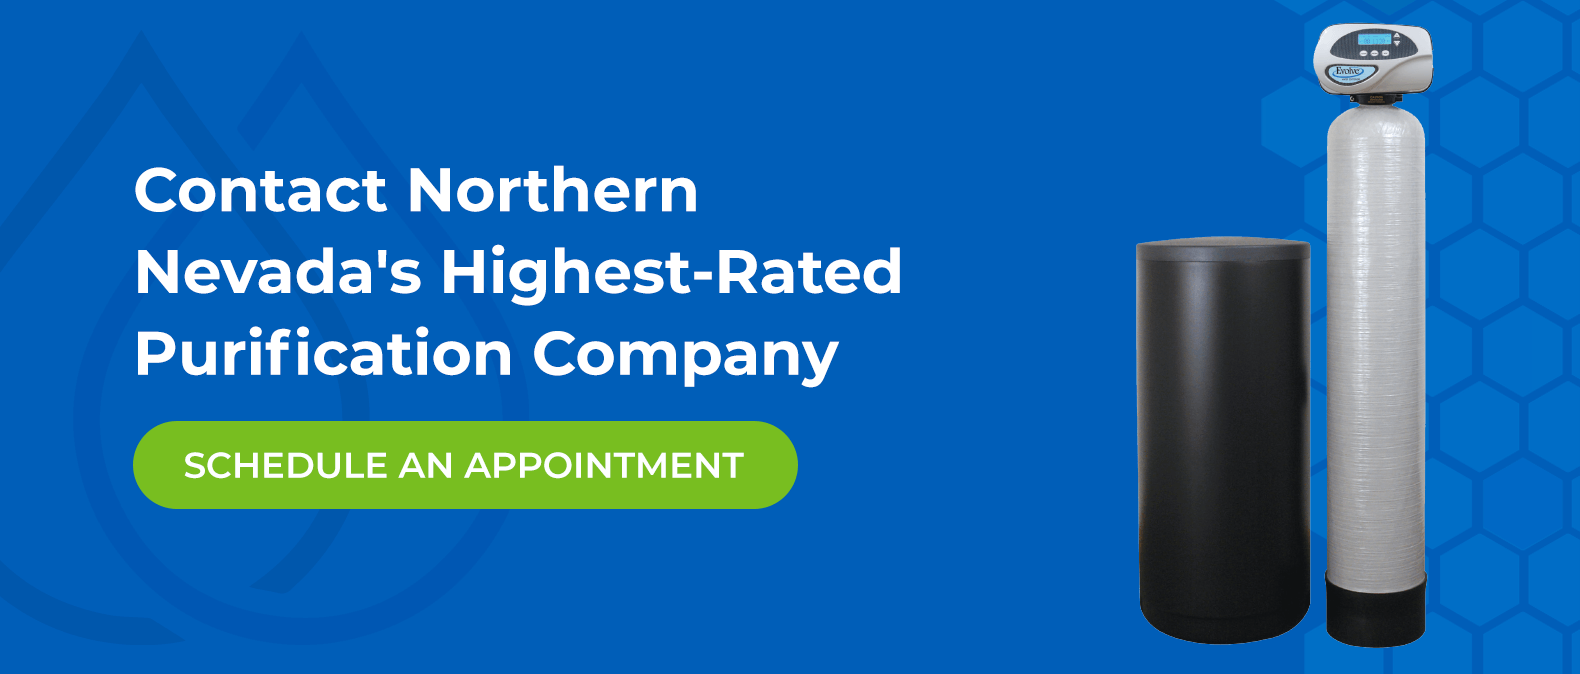 Contact Northern Nevada's Highest-Rated Purification Company